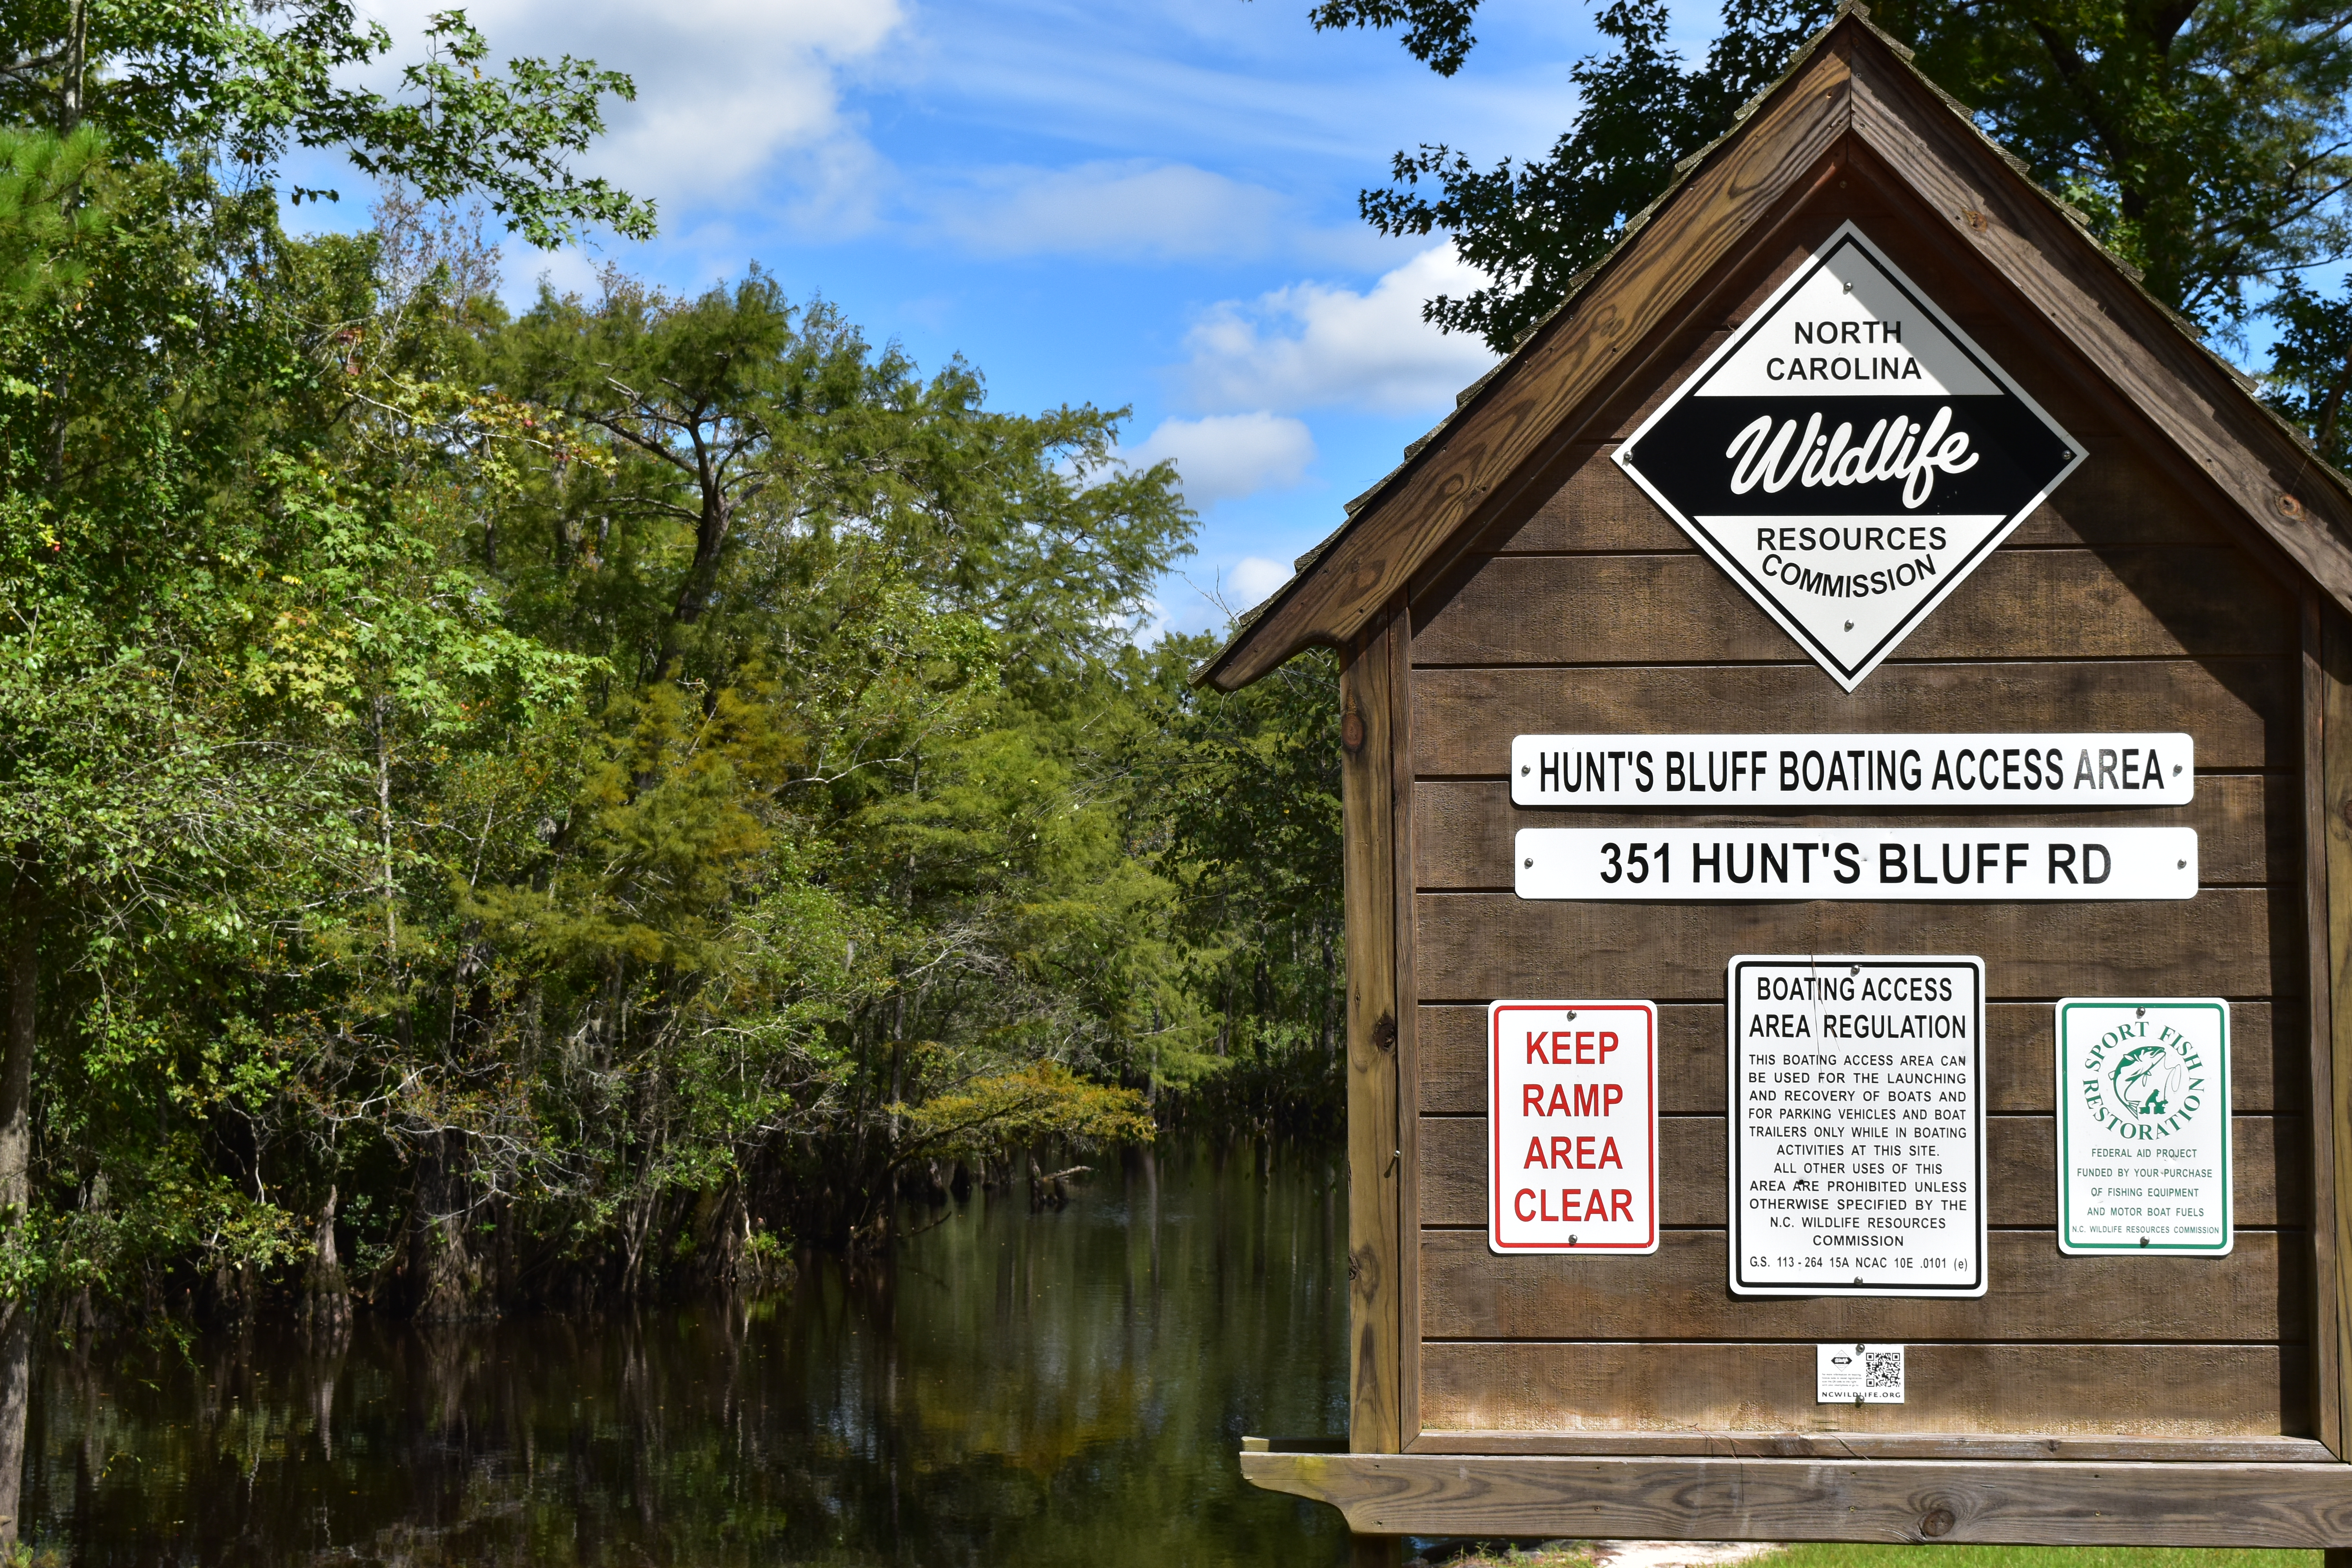 A no-fee Wildlife Resources Commission boat ramp is among several points of access to the Three Sisters Swamp on the Black River. Photo from NC Wetlands